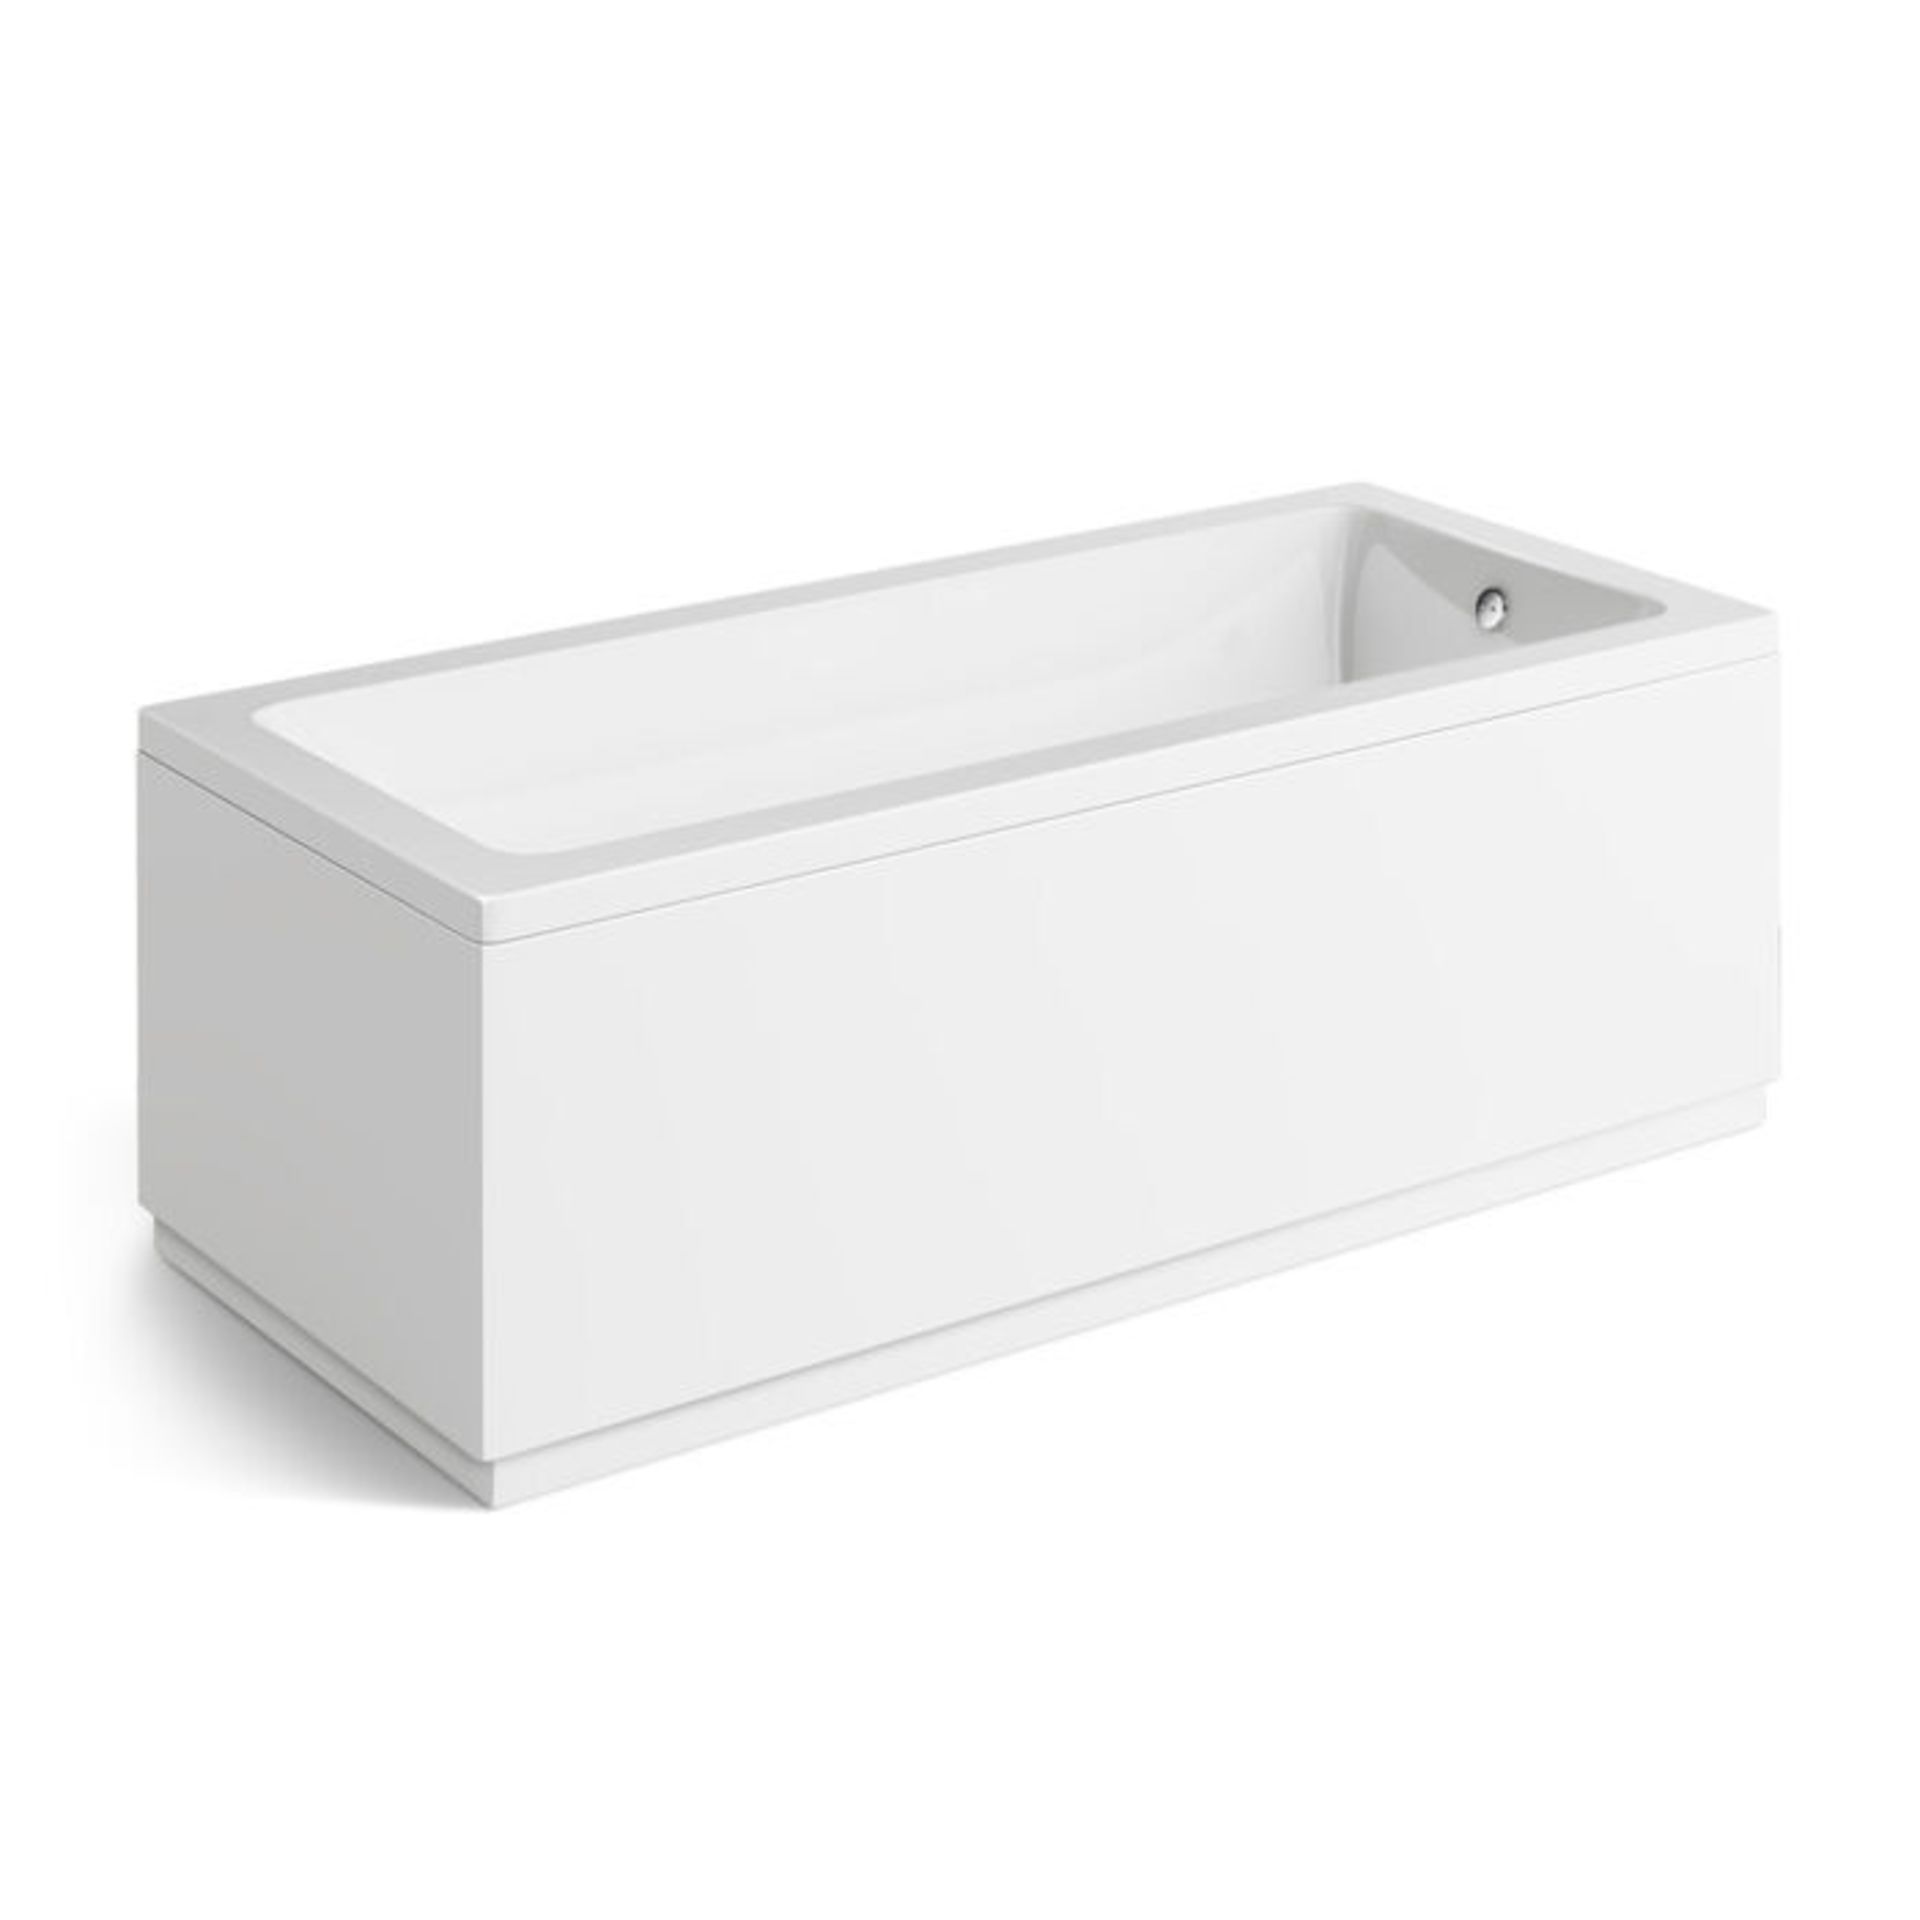 (Z215) 1400x700mm Square Single Ended Bath. Manufactured in the UK Sanitary grade cell cast re... - Image 3 of 3